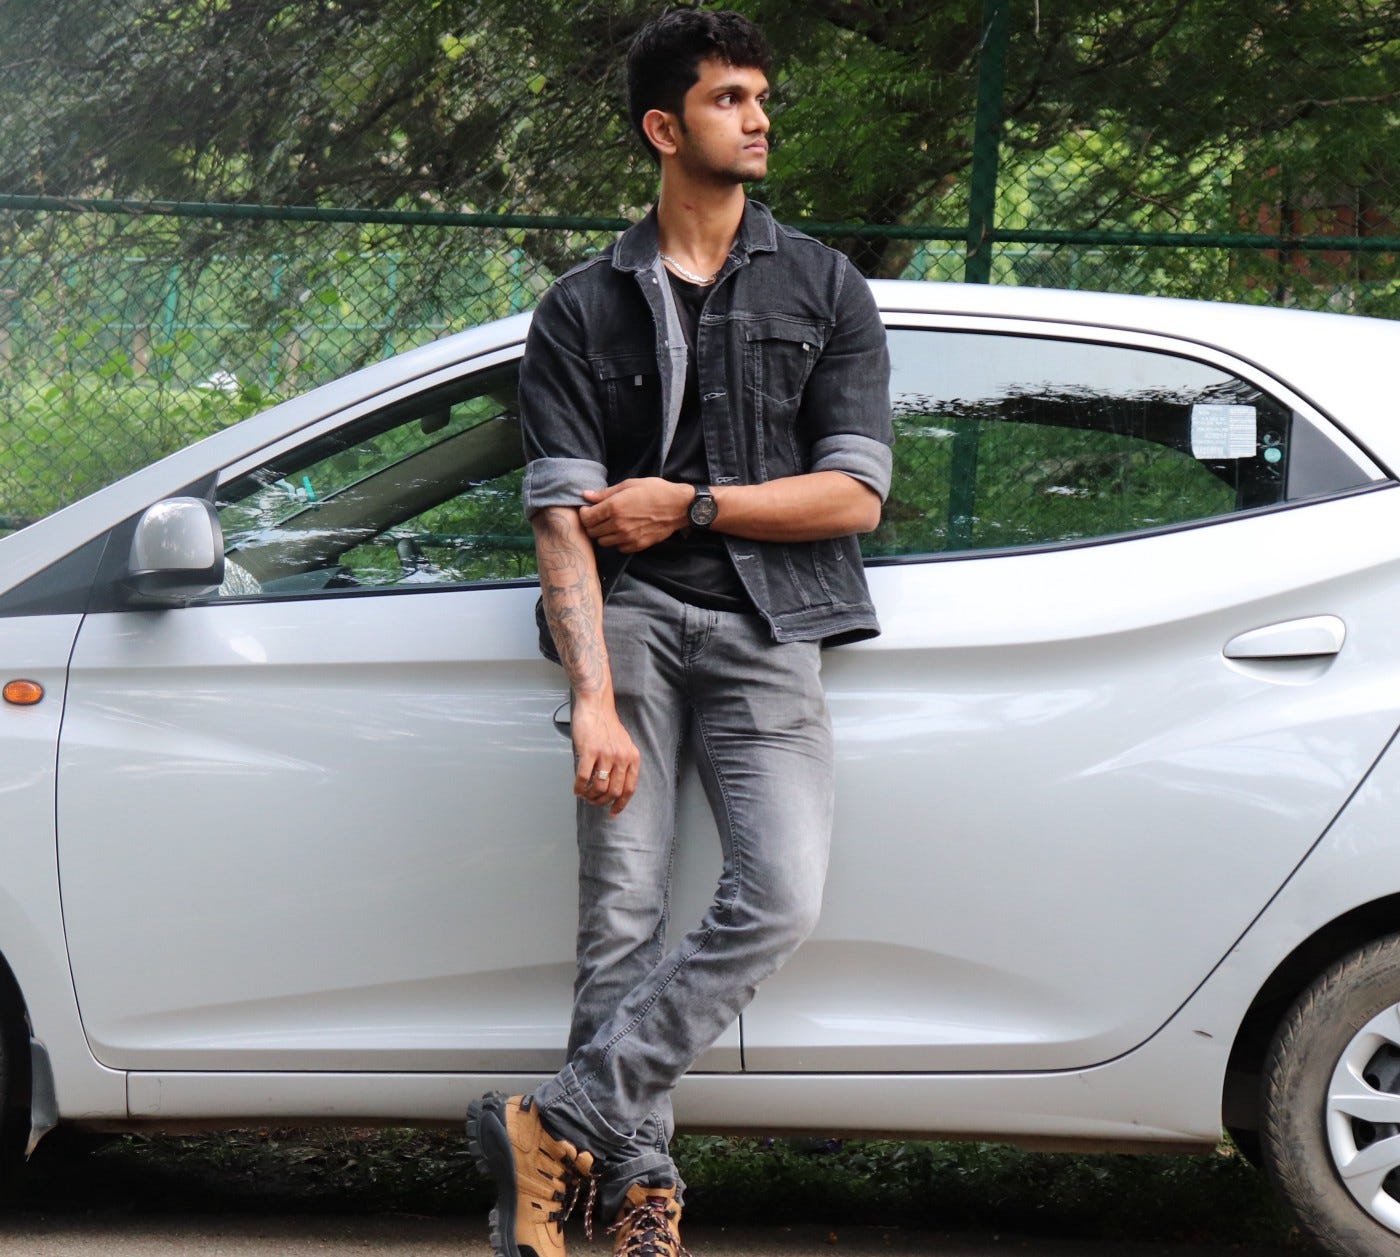 A photo of the author dressed in a jacket and jeans standing against his car’s side